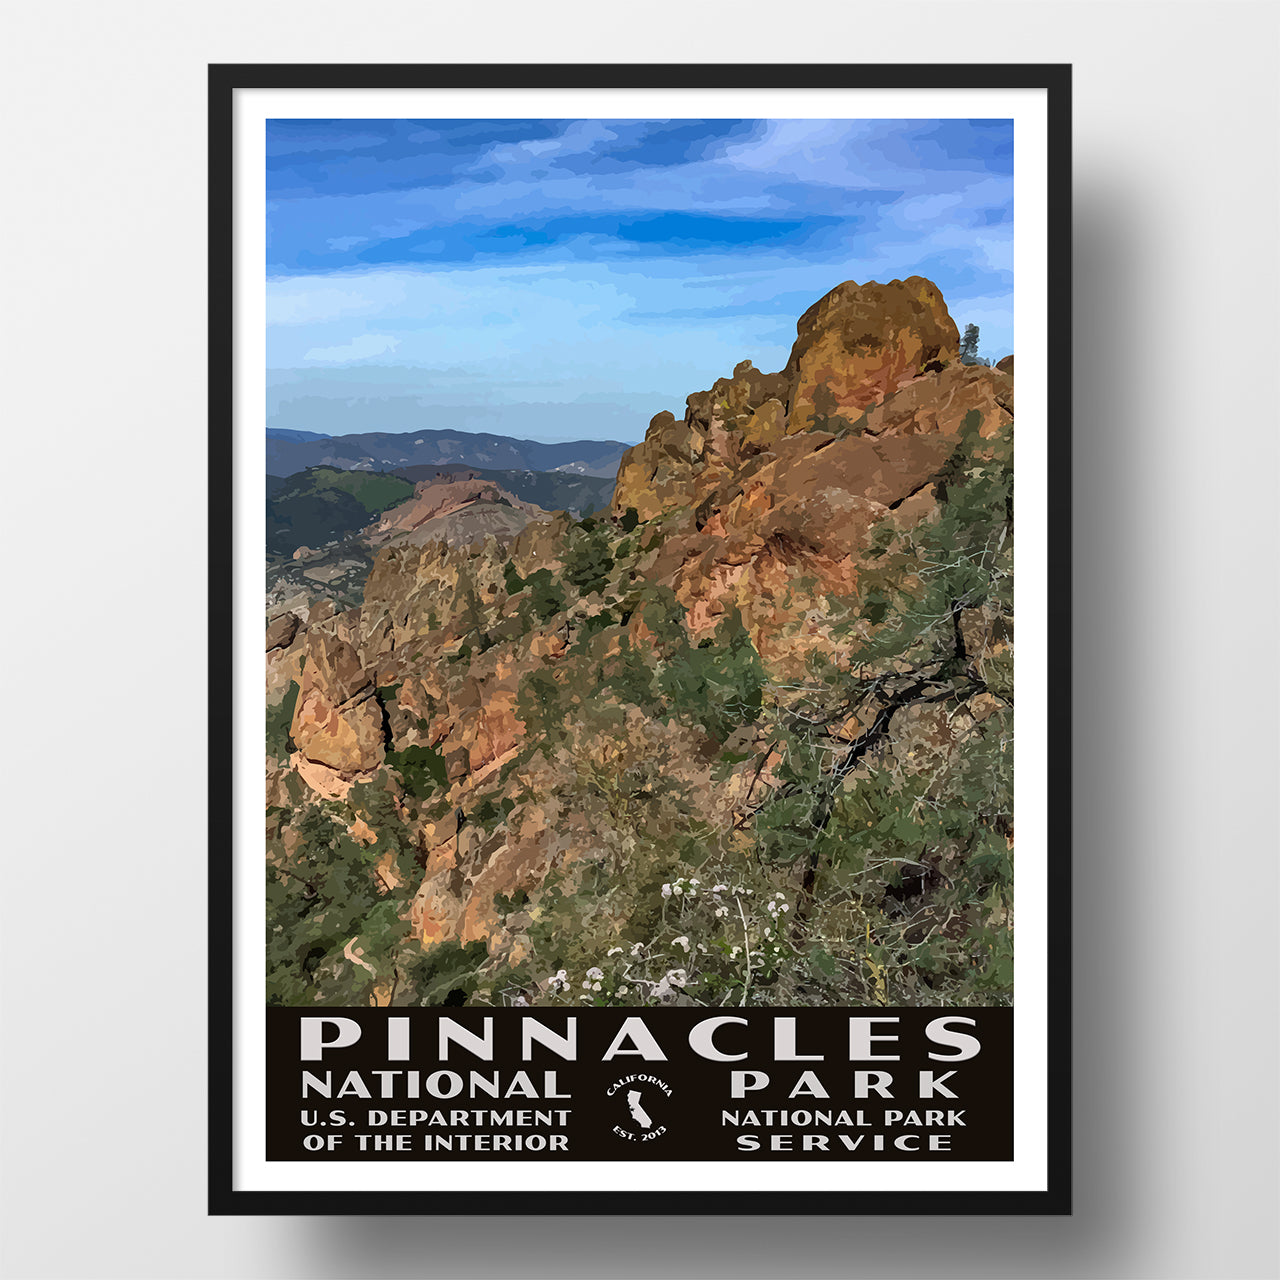 Pinnacles National Park Poster, wpa style